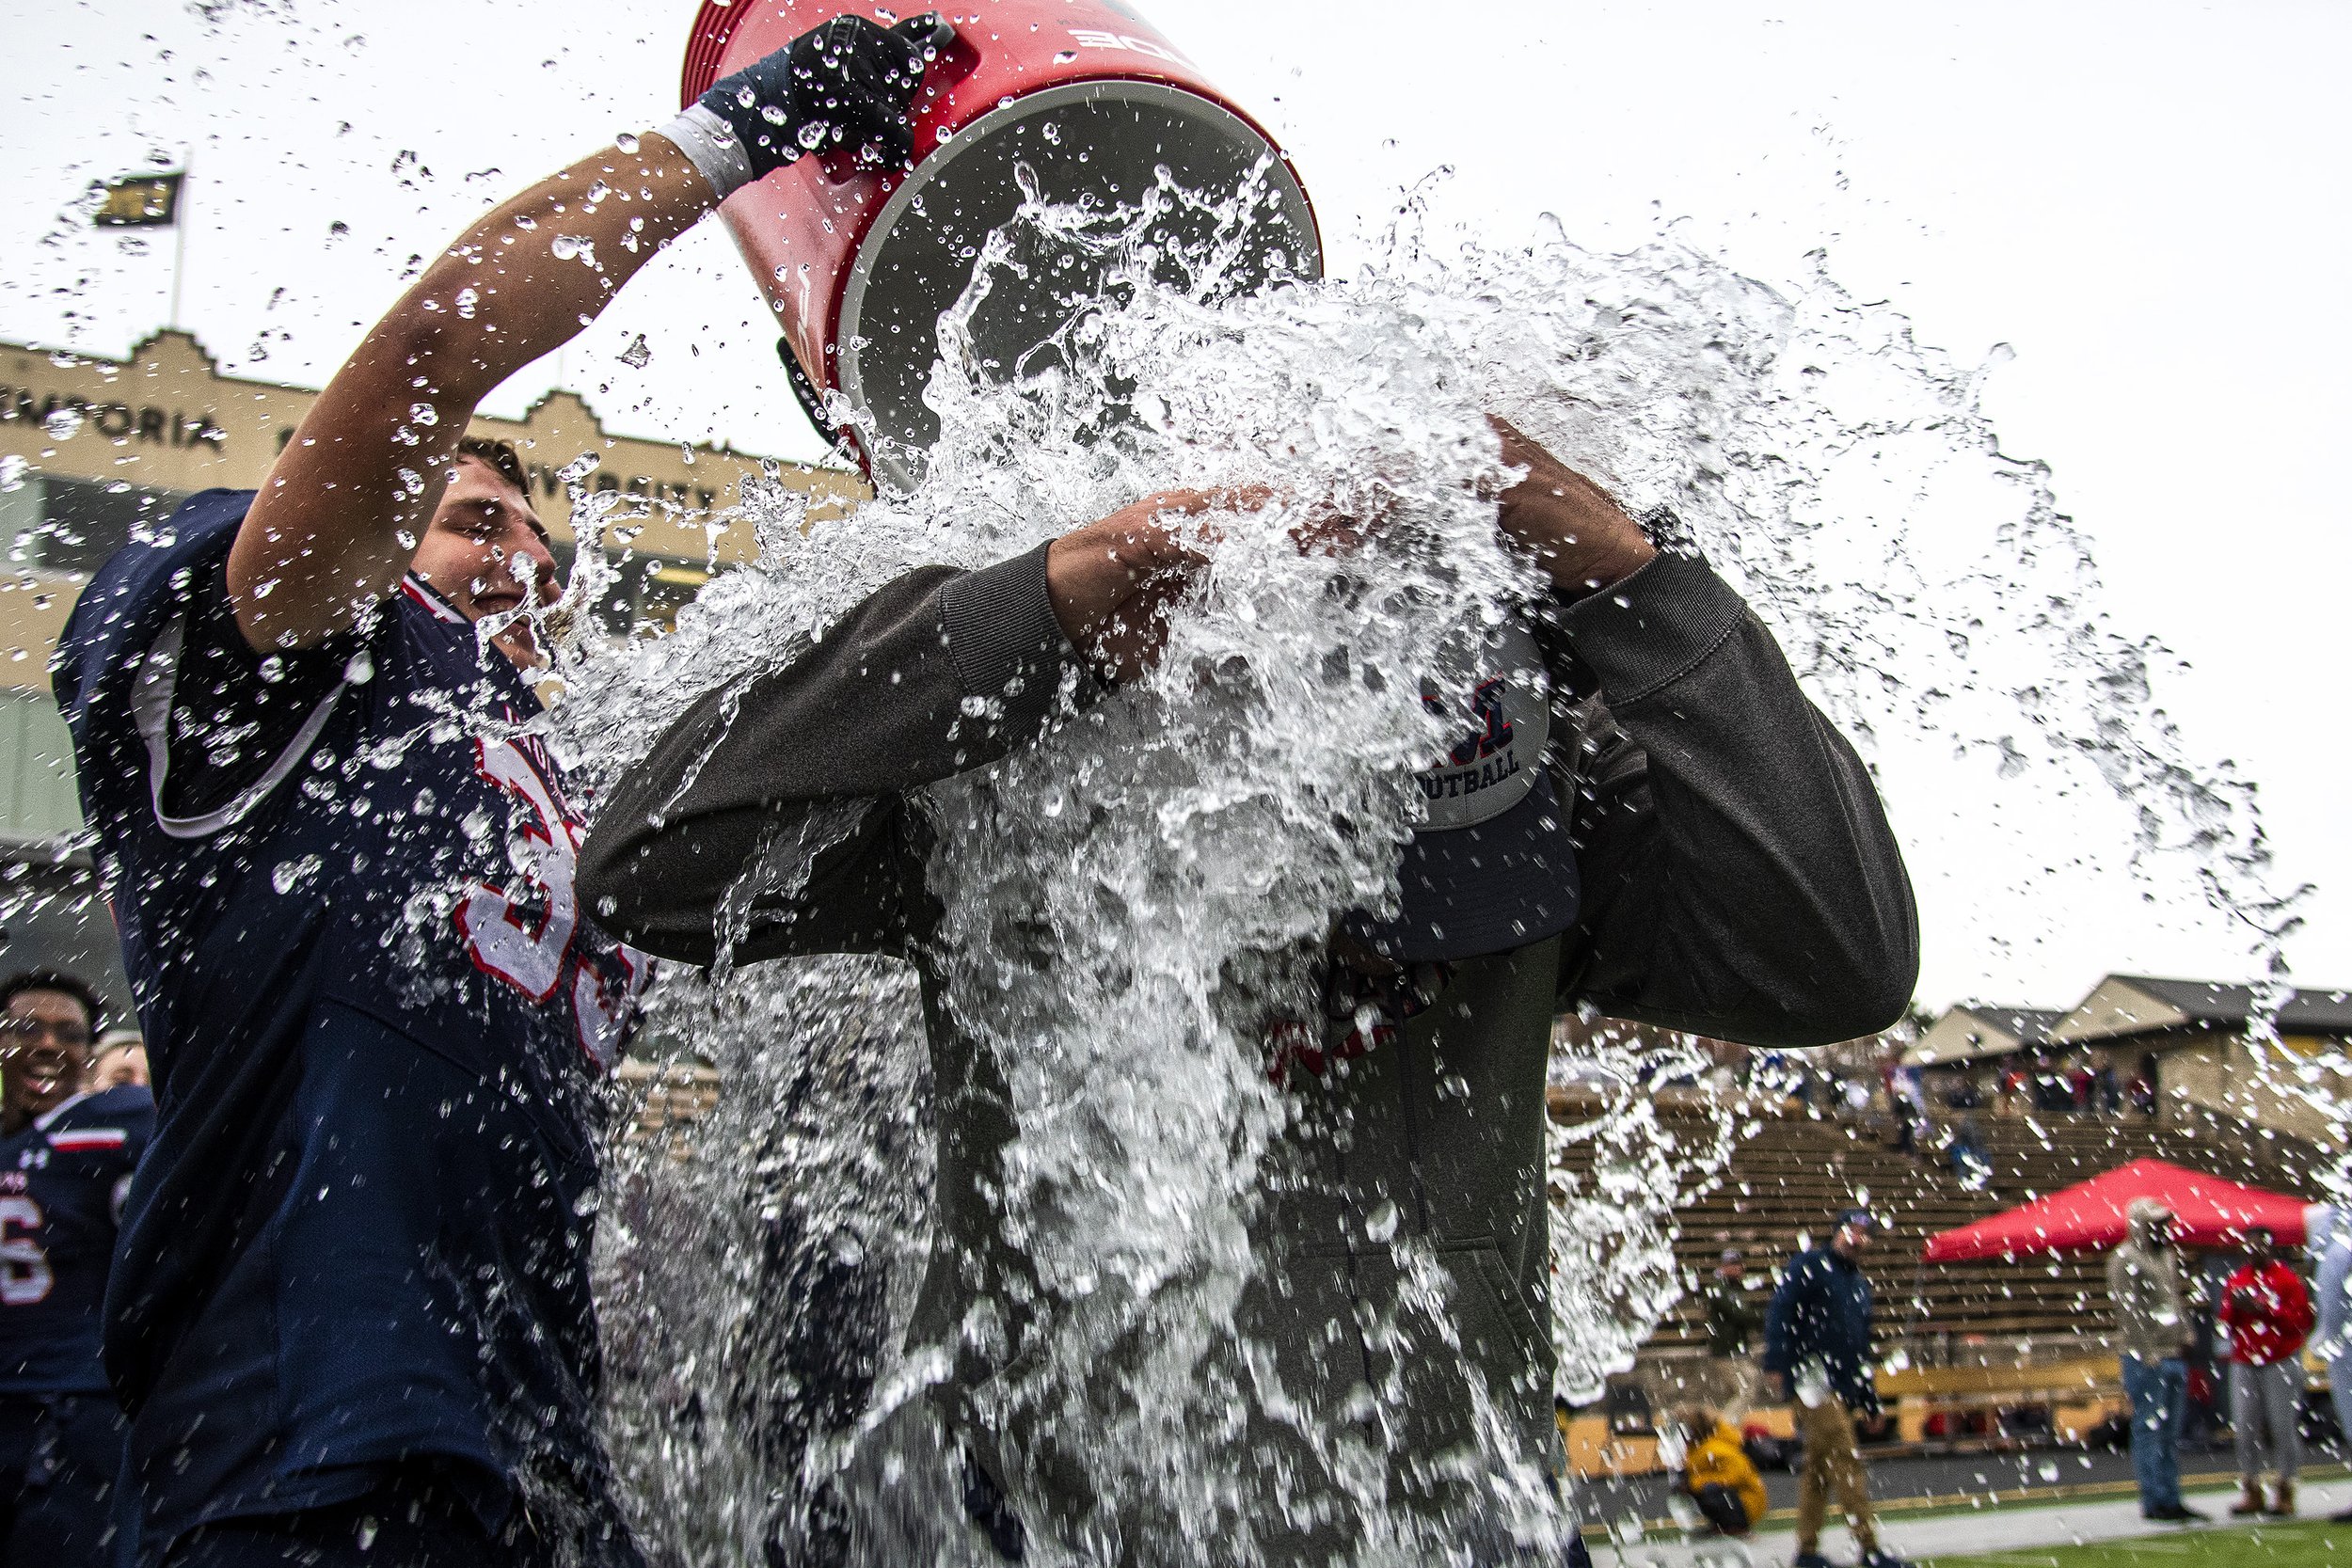  Manhattan High School head football coach Joe Schartz is given an ice bath by linebacker Ben Irvine, left, after the Indians’ 21-20 double-overtime KSHSAA 6A state championship victory over Gardner Edgerton High School on Saturday, Nov. 26, 2022, at